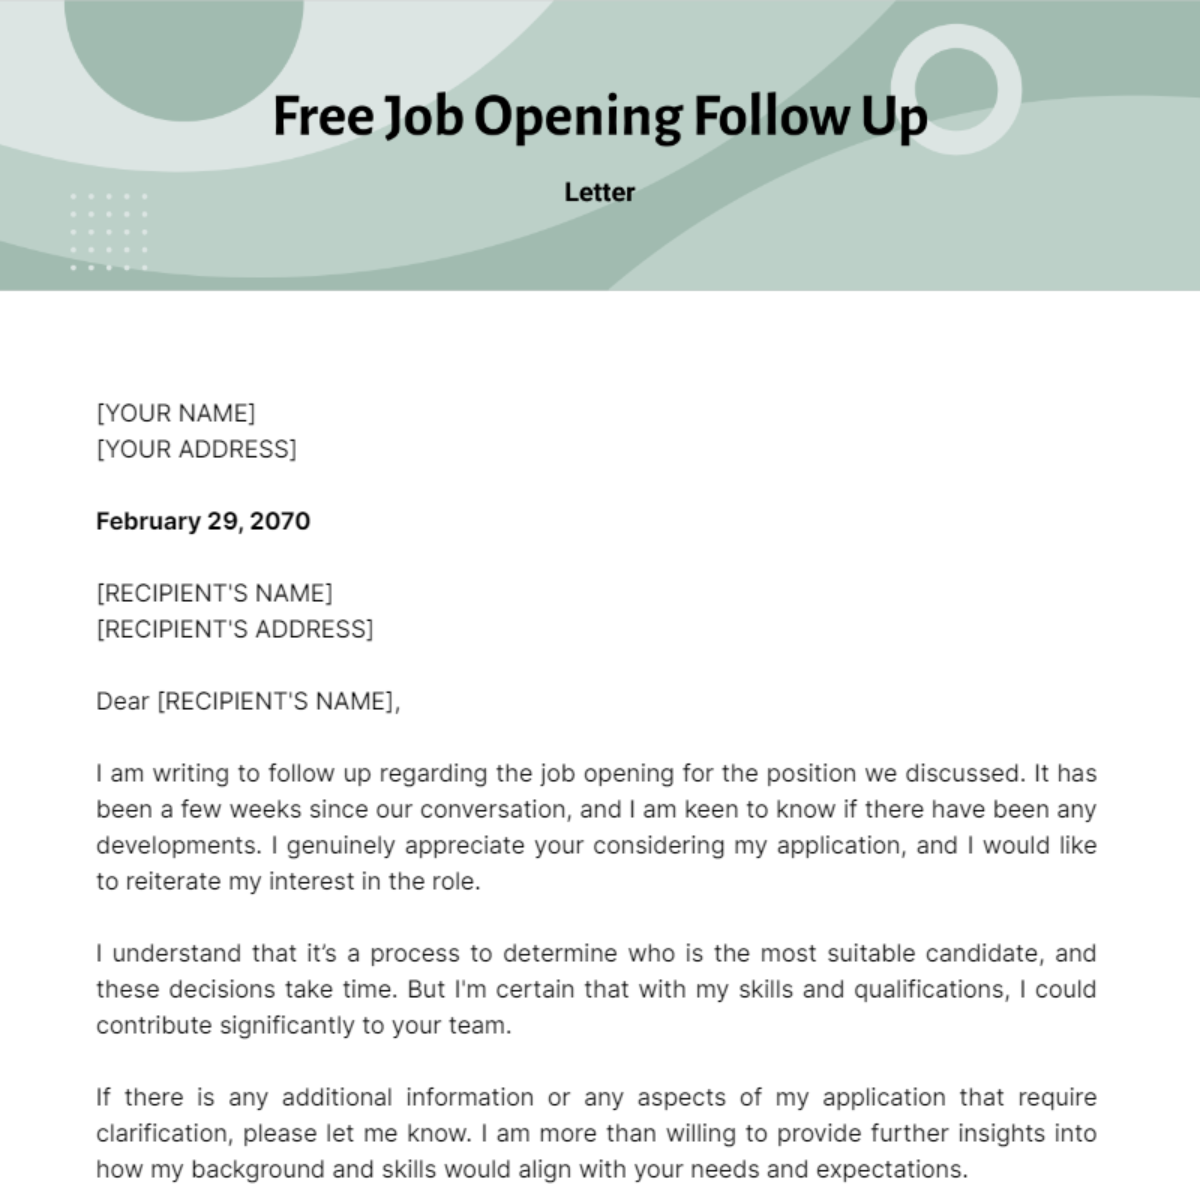 Job Opening Follow Up Letter Template